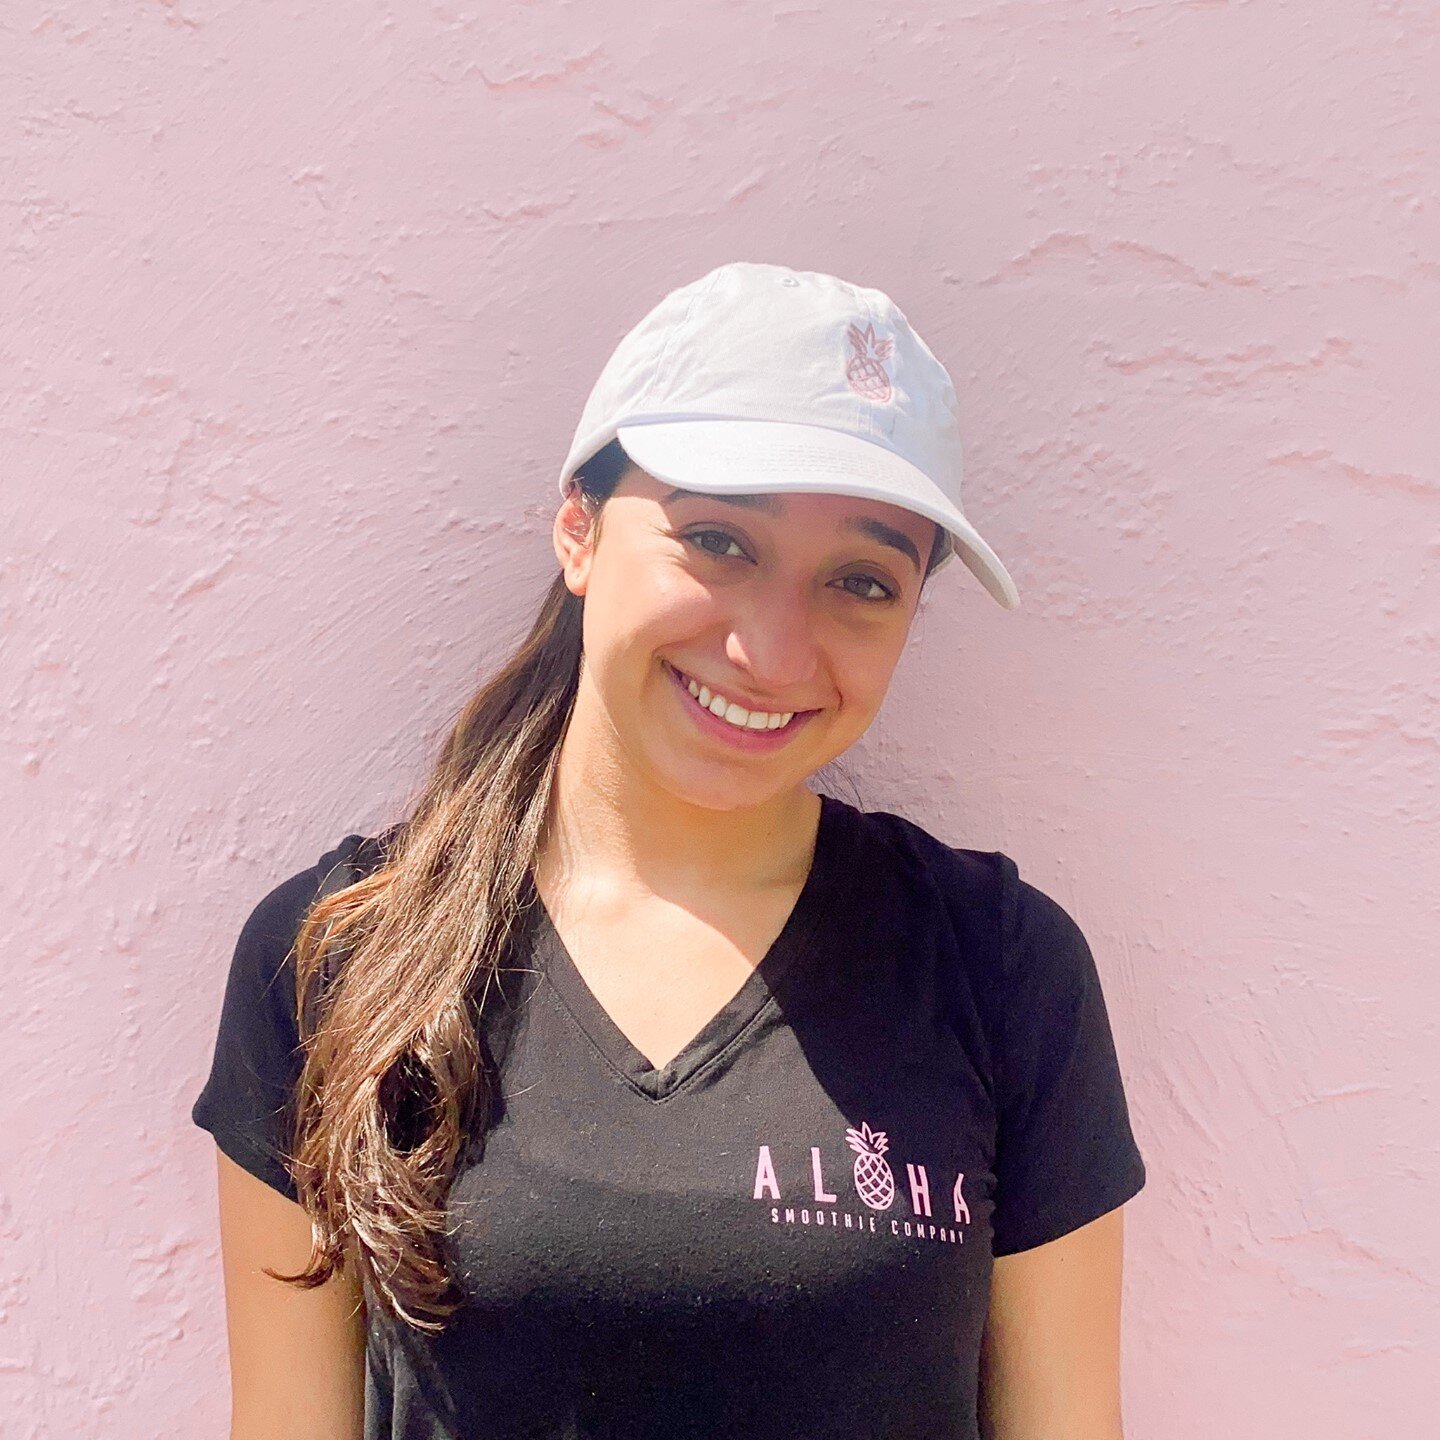 Wellness Warriors, meet Zoe! ⁠
⁠
Favorite Menu Item || Pink Paradise smoothie! 😍⁠
⁠
Favorite Movement Practice || working out with my friends at the gym 💪🏼⁠
⁠
Fun Fact || I am a twin! 👯&zwj;♀️⁠
⁠
Favorite Thing to do Outside of Aloha || Spend tim